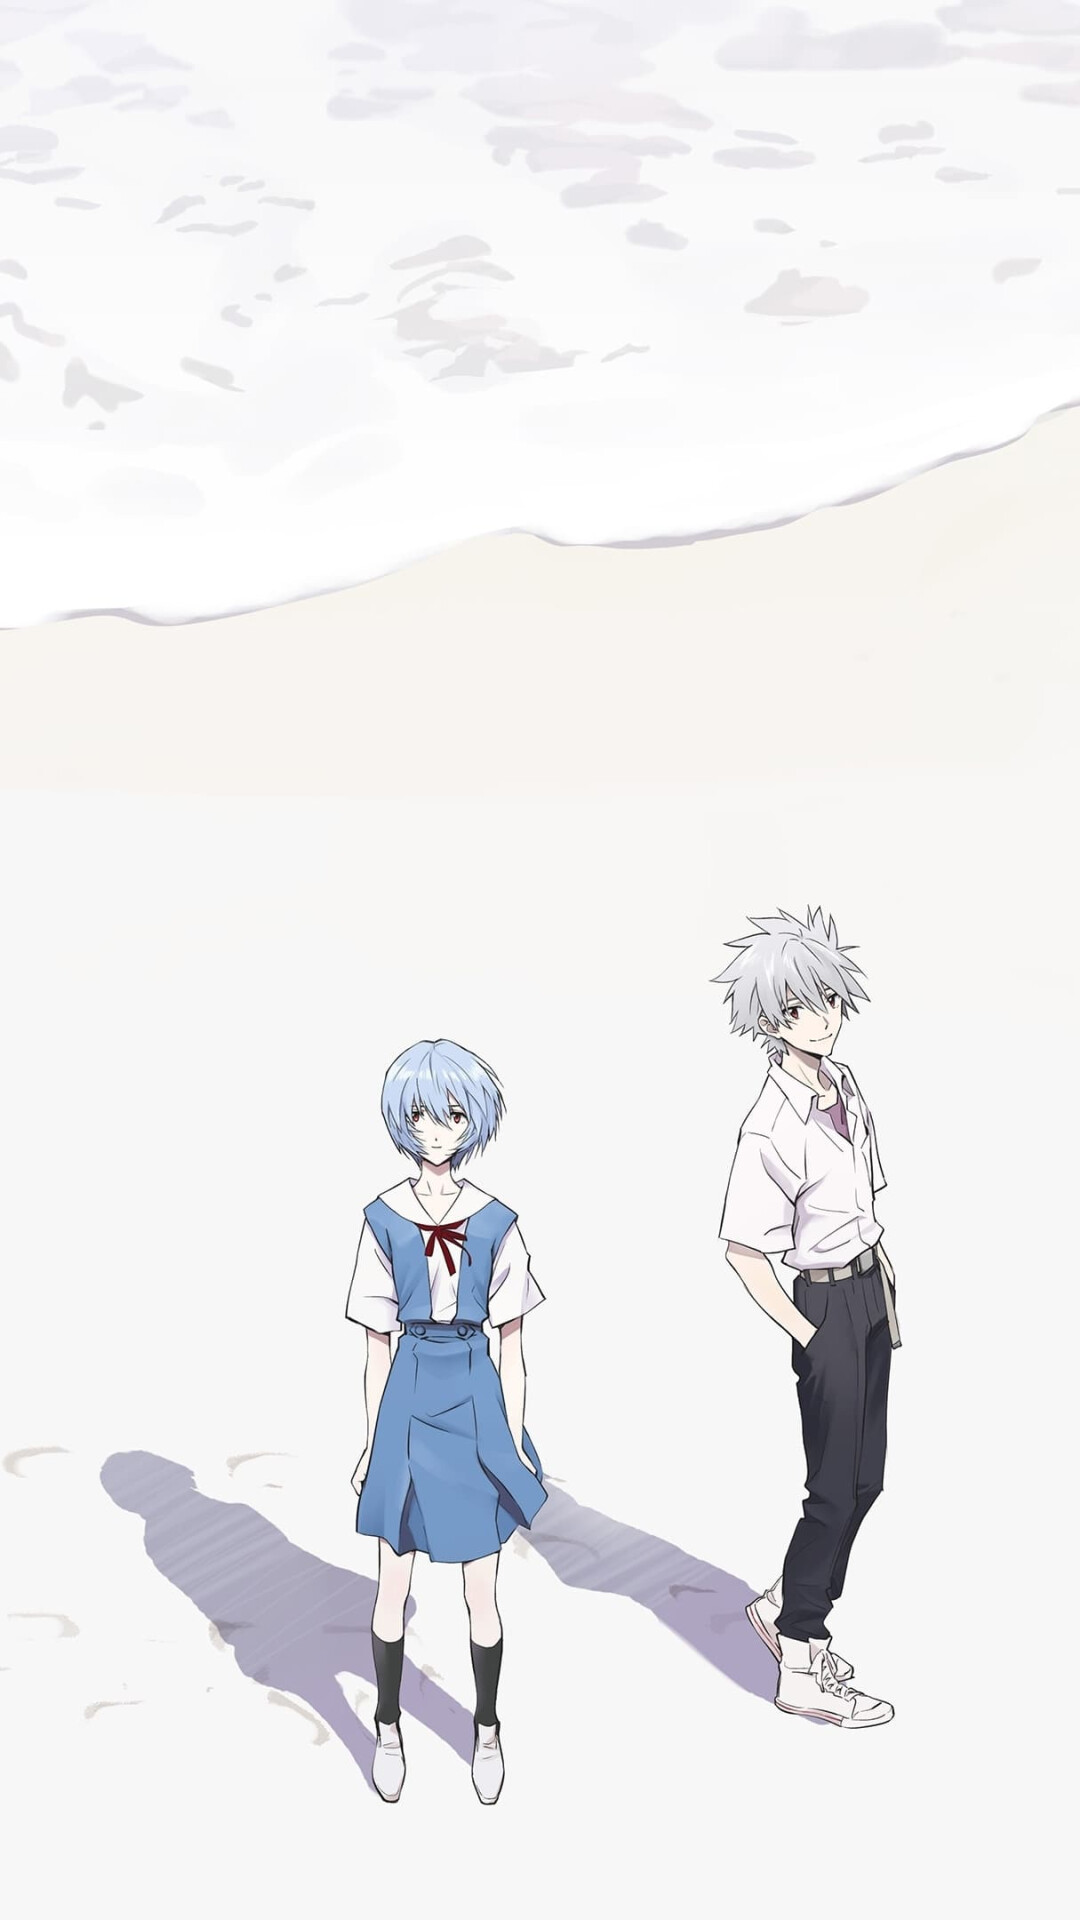 Evangelion: 3.0+1.0 Thrice Upon a Time: Rei Ayanami, The “First Children” of the Marduk Report and the pilot of EVA-00. 1080x1920 Full HD Background.